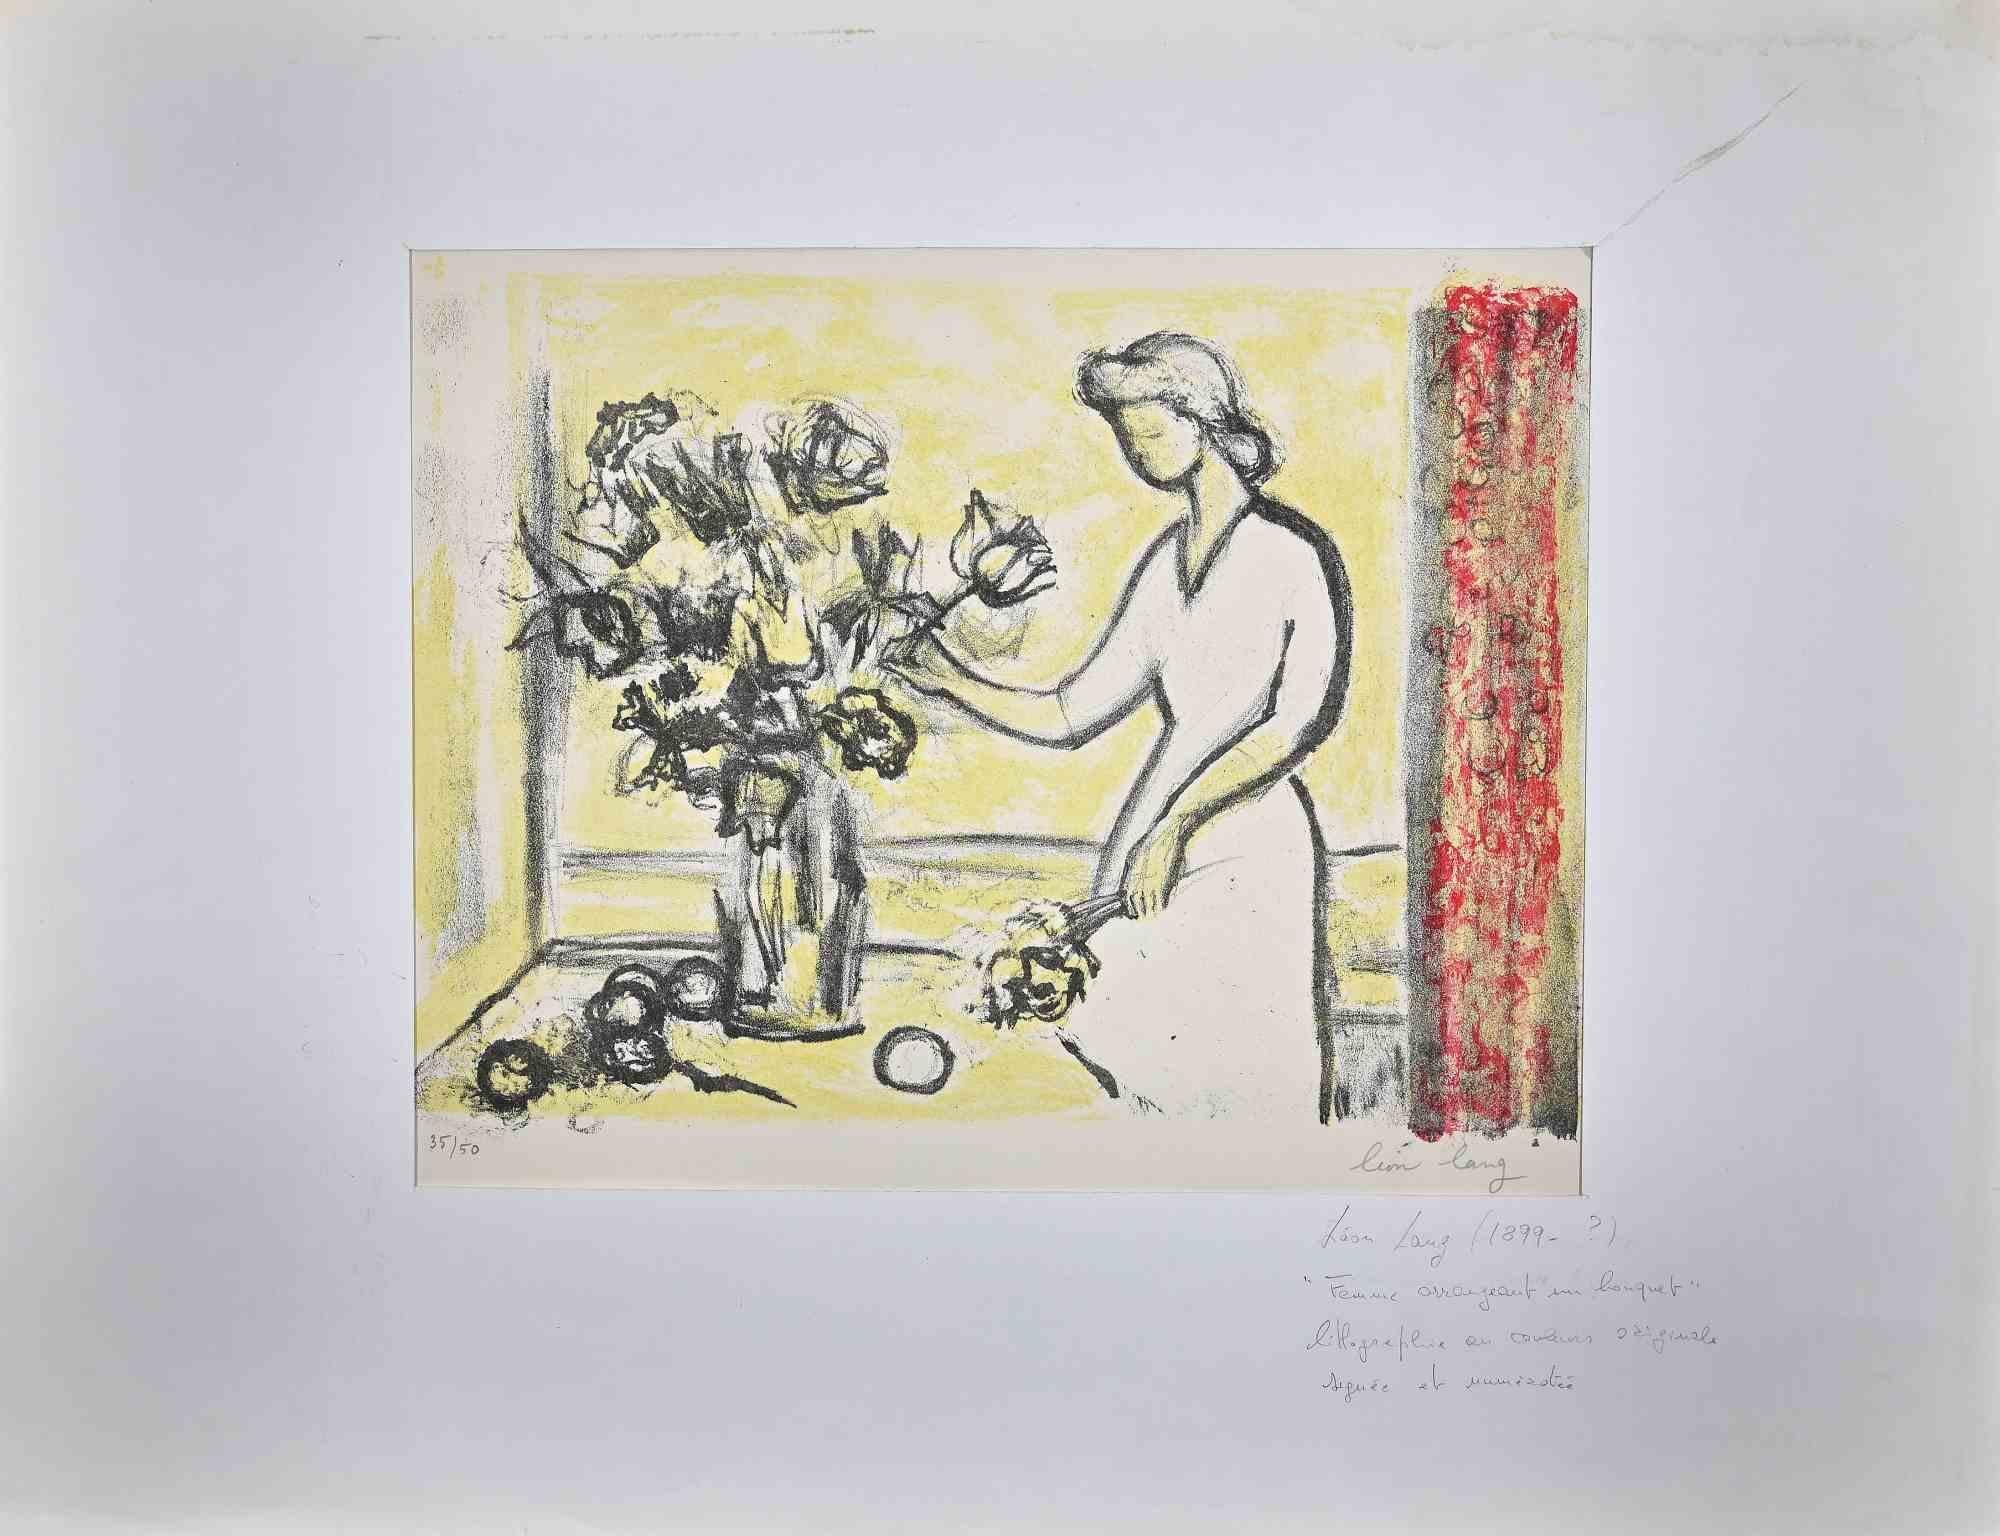 Woman is Original lithography realized by Leon Lang in the mid-20th Century.

The artwork is in good condition.

Hand-signed.

Numbered. Edition, 35/50.

The artwork is depicted through soft strokes in a well-balanced composition.